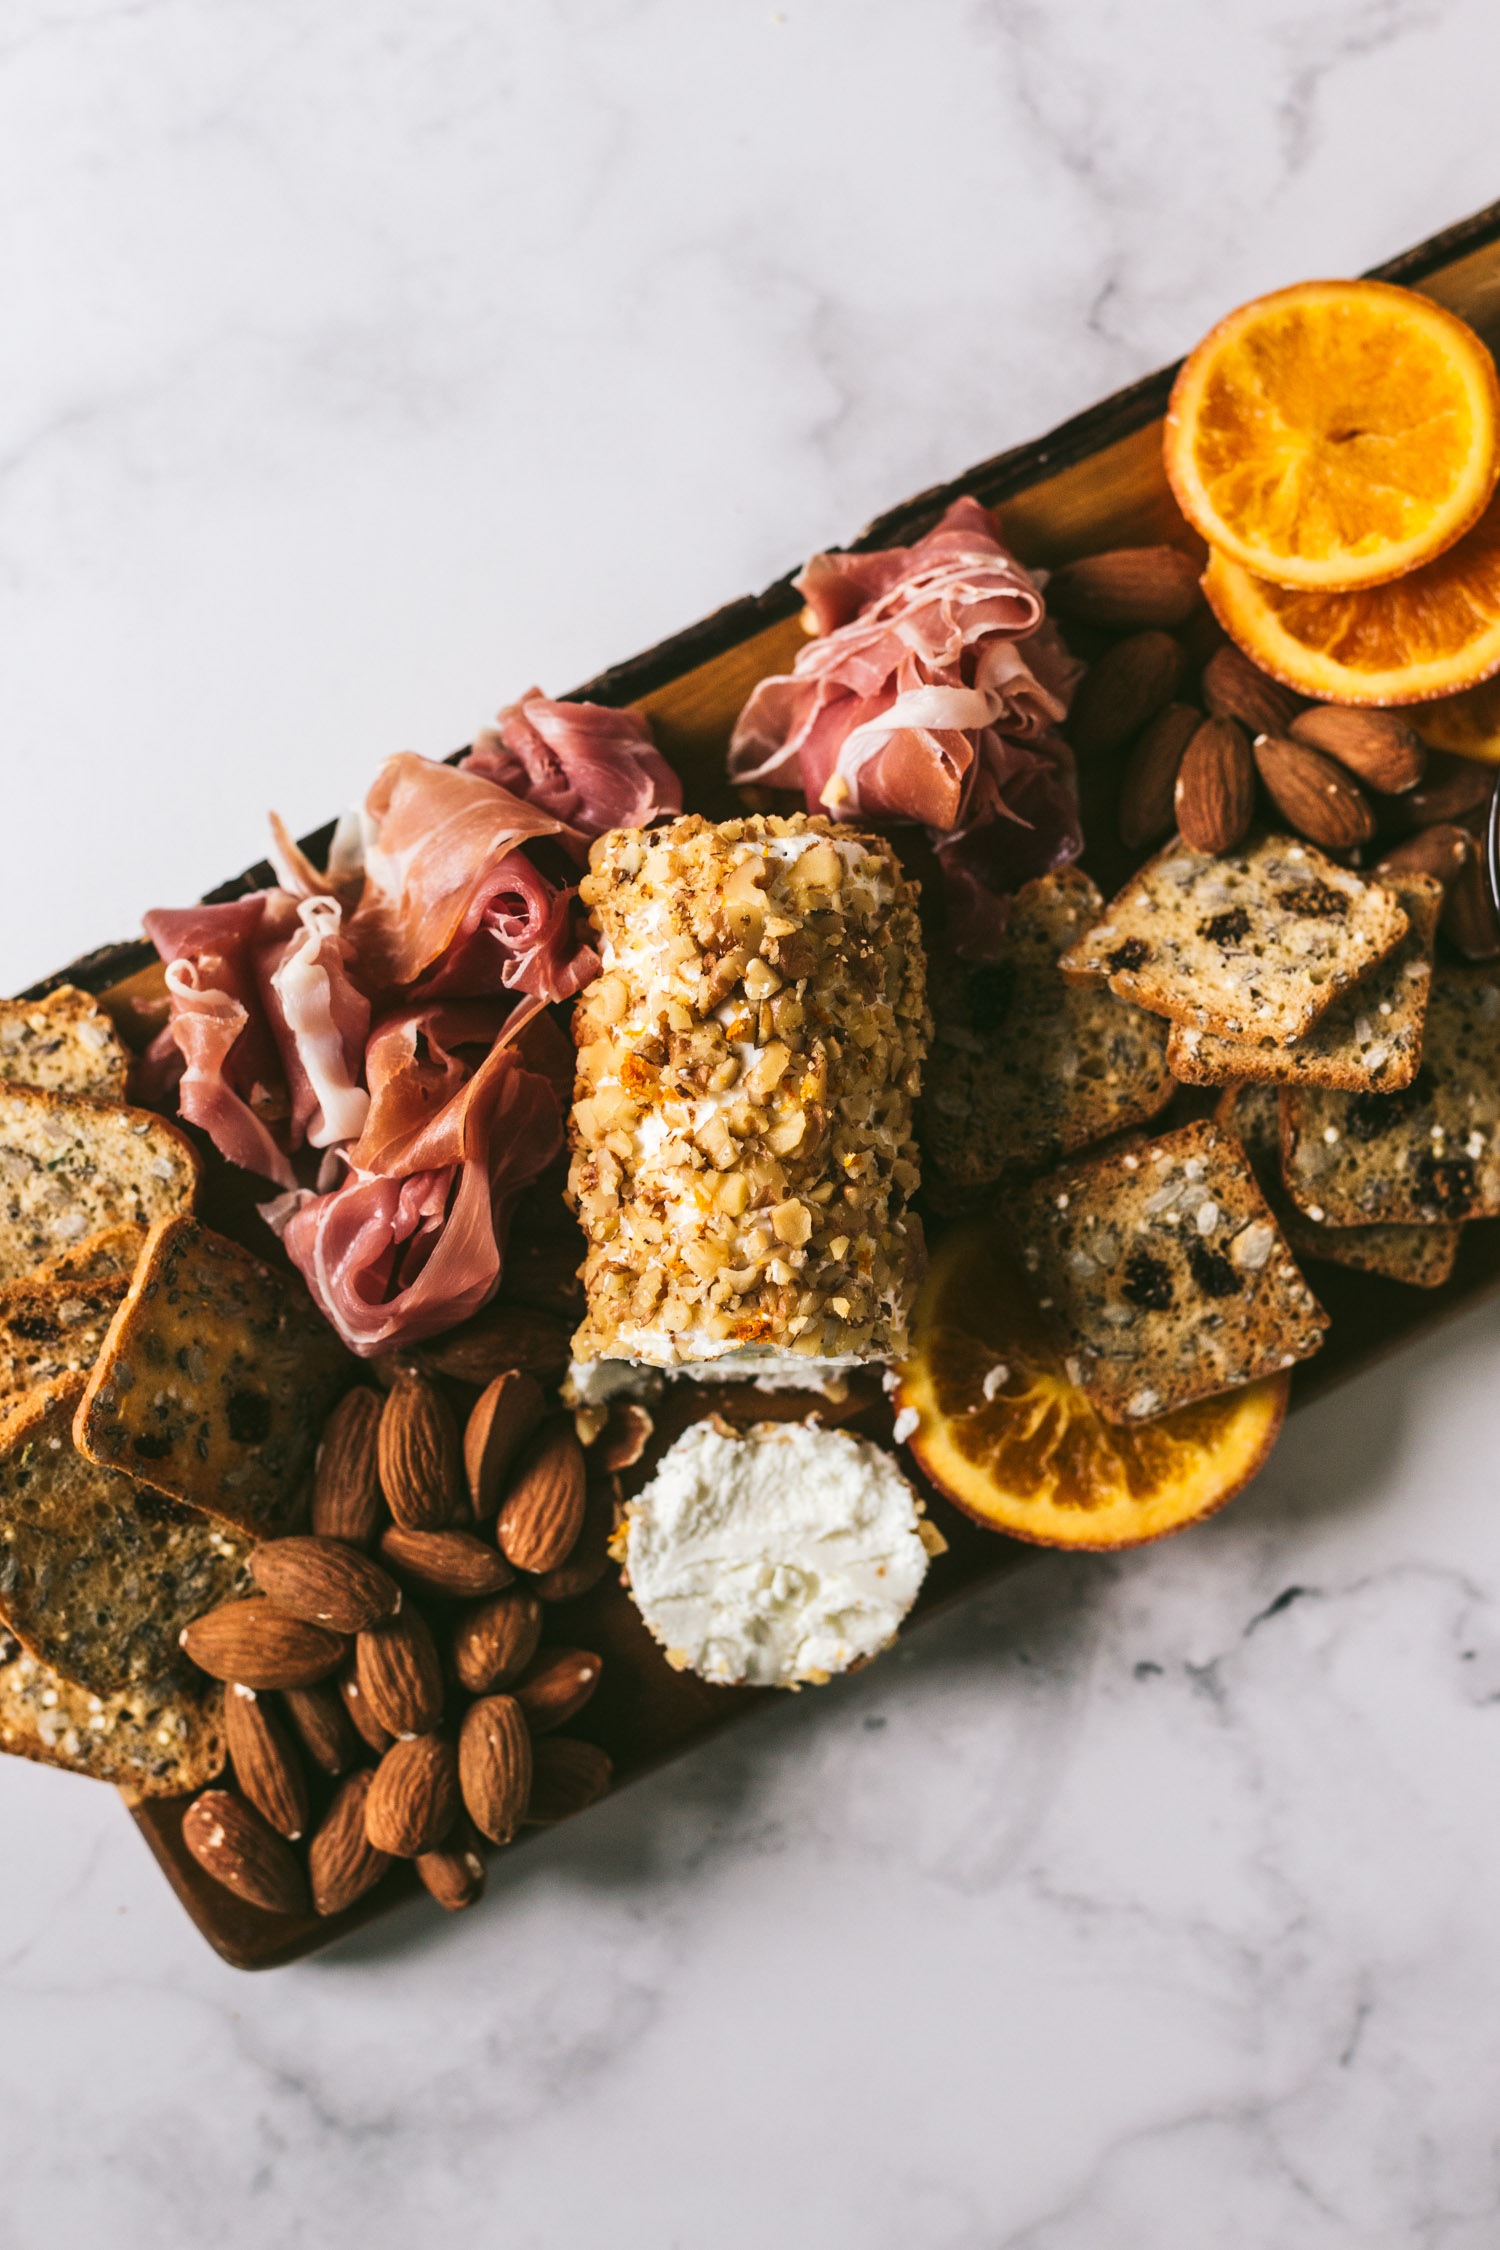 Overhead image of plated charcuterie board on marble surface. From left to right, herbed crackers, almonds, procuitto, Toasted walnut goatcheese, herbed crackers, candied oranges, honey, olives